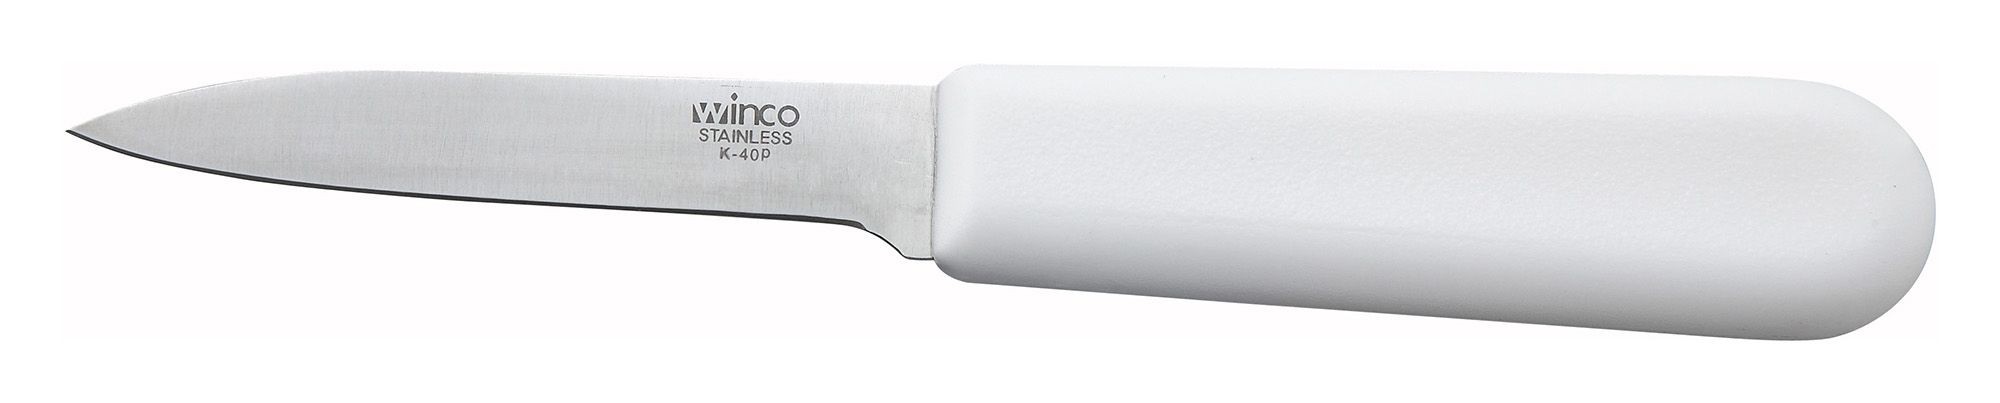 Winco K-40P Paring Knife with Plastic Handle 2-1/2"